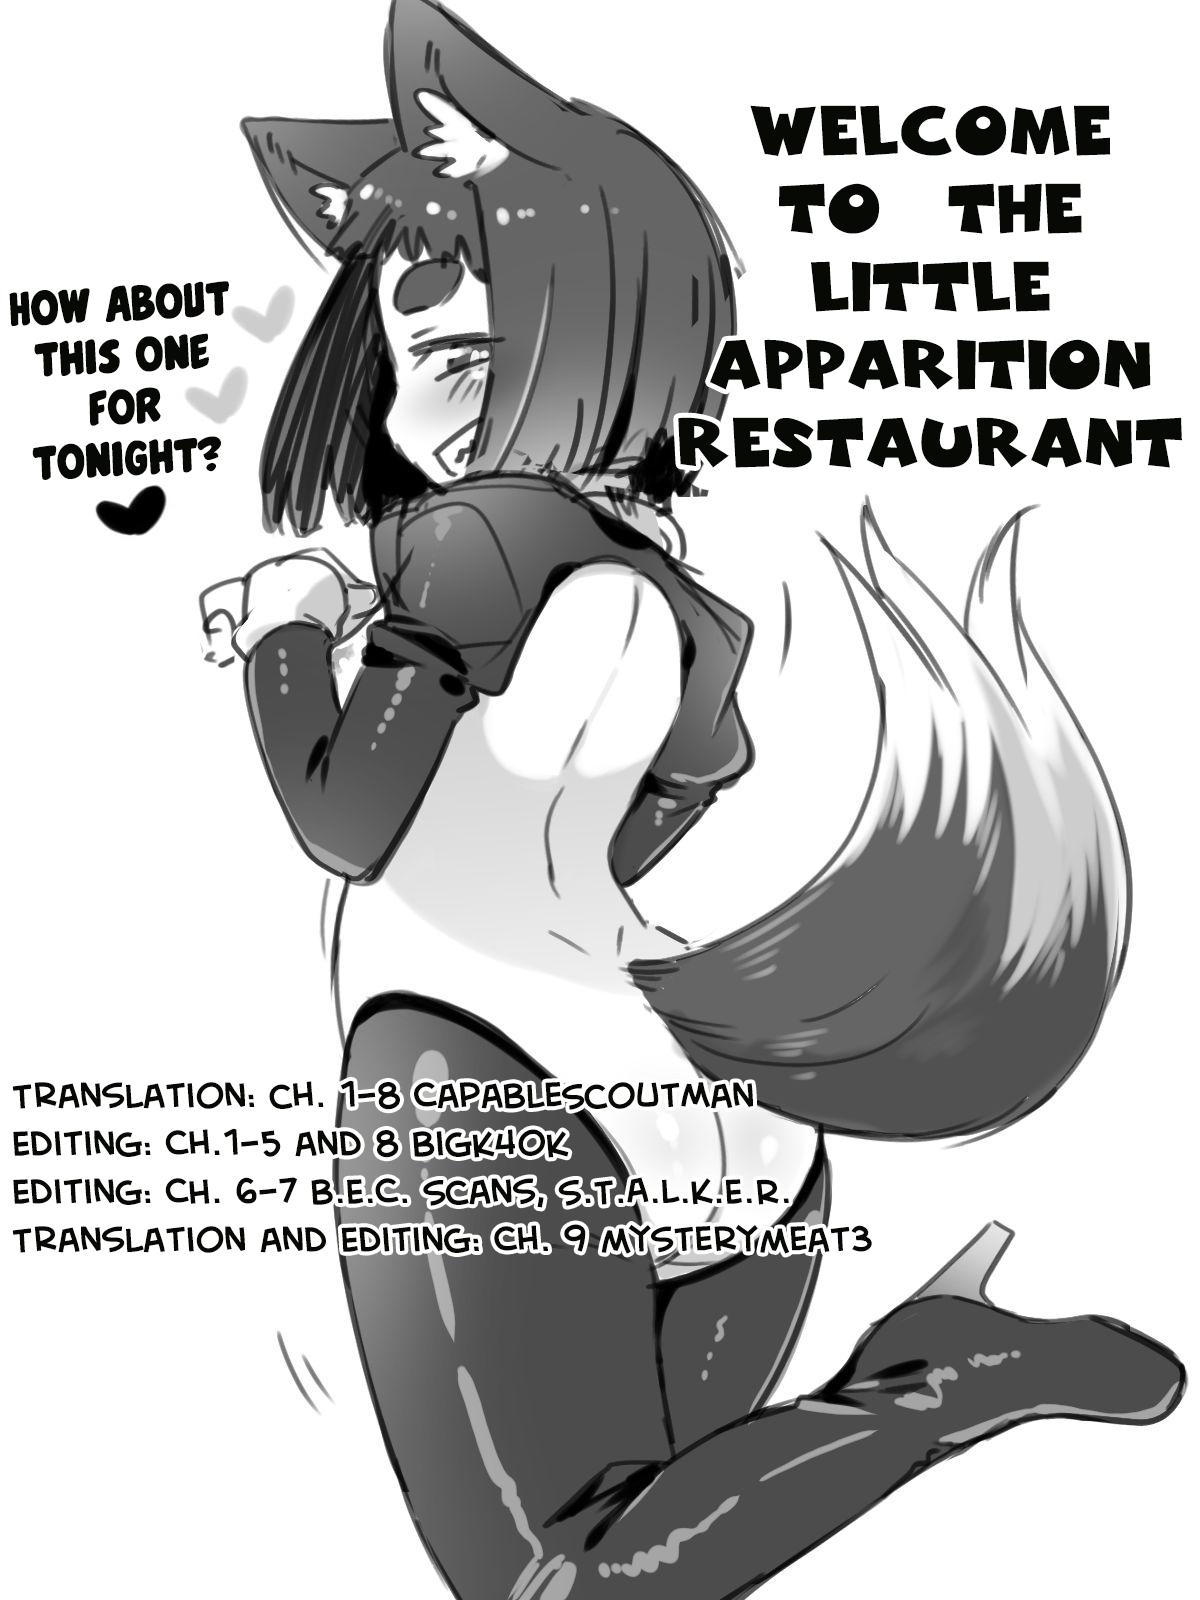 Caught Youkai Koryouriya ni Youkoso - Welcome to apparition small restaurant Dick Suckers - Page 218